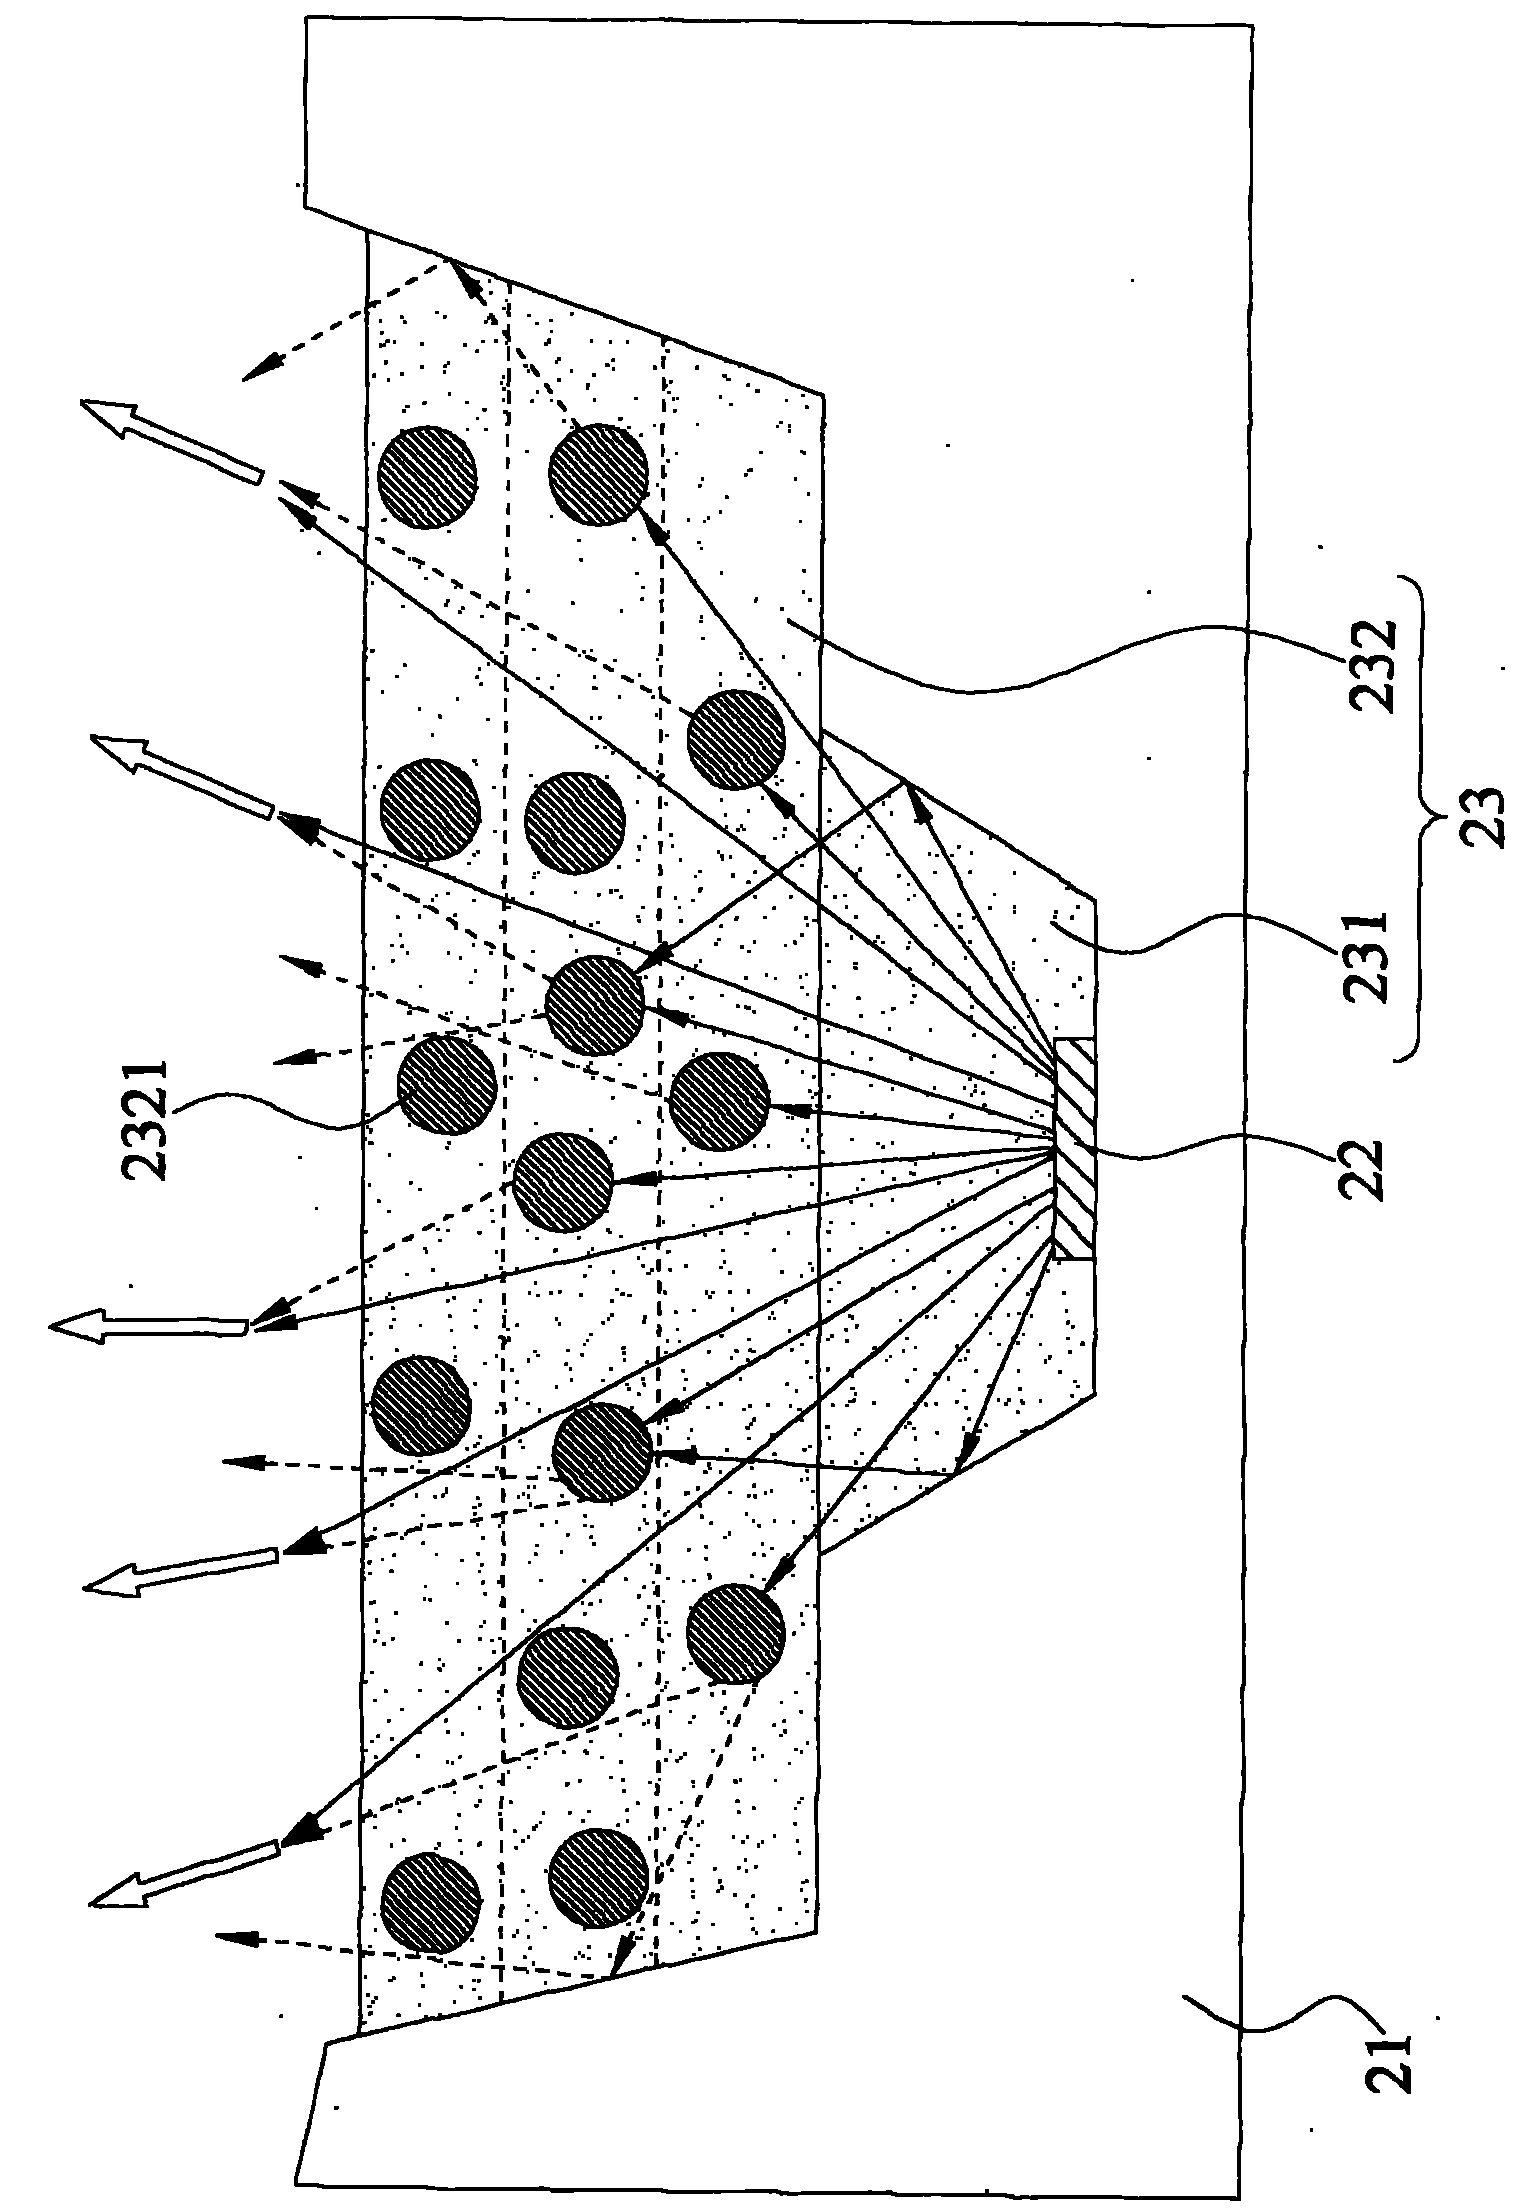 Light emitting diode packaging structure